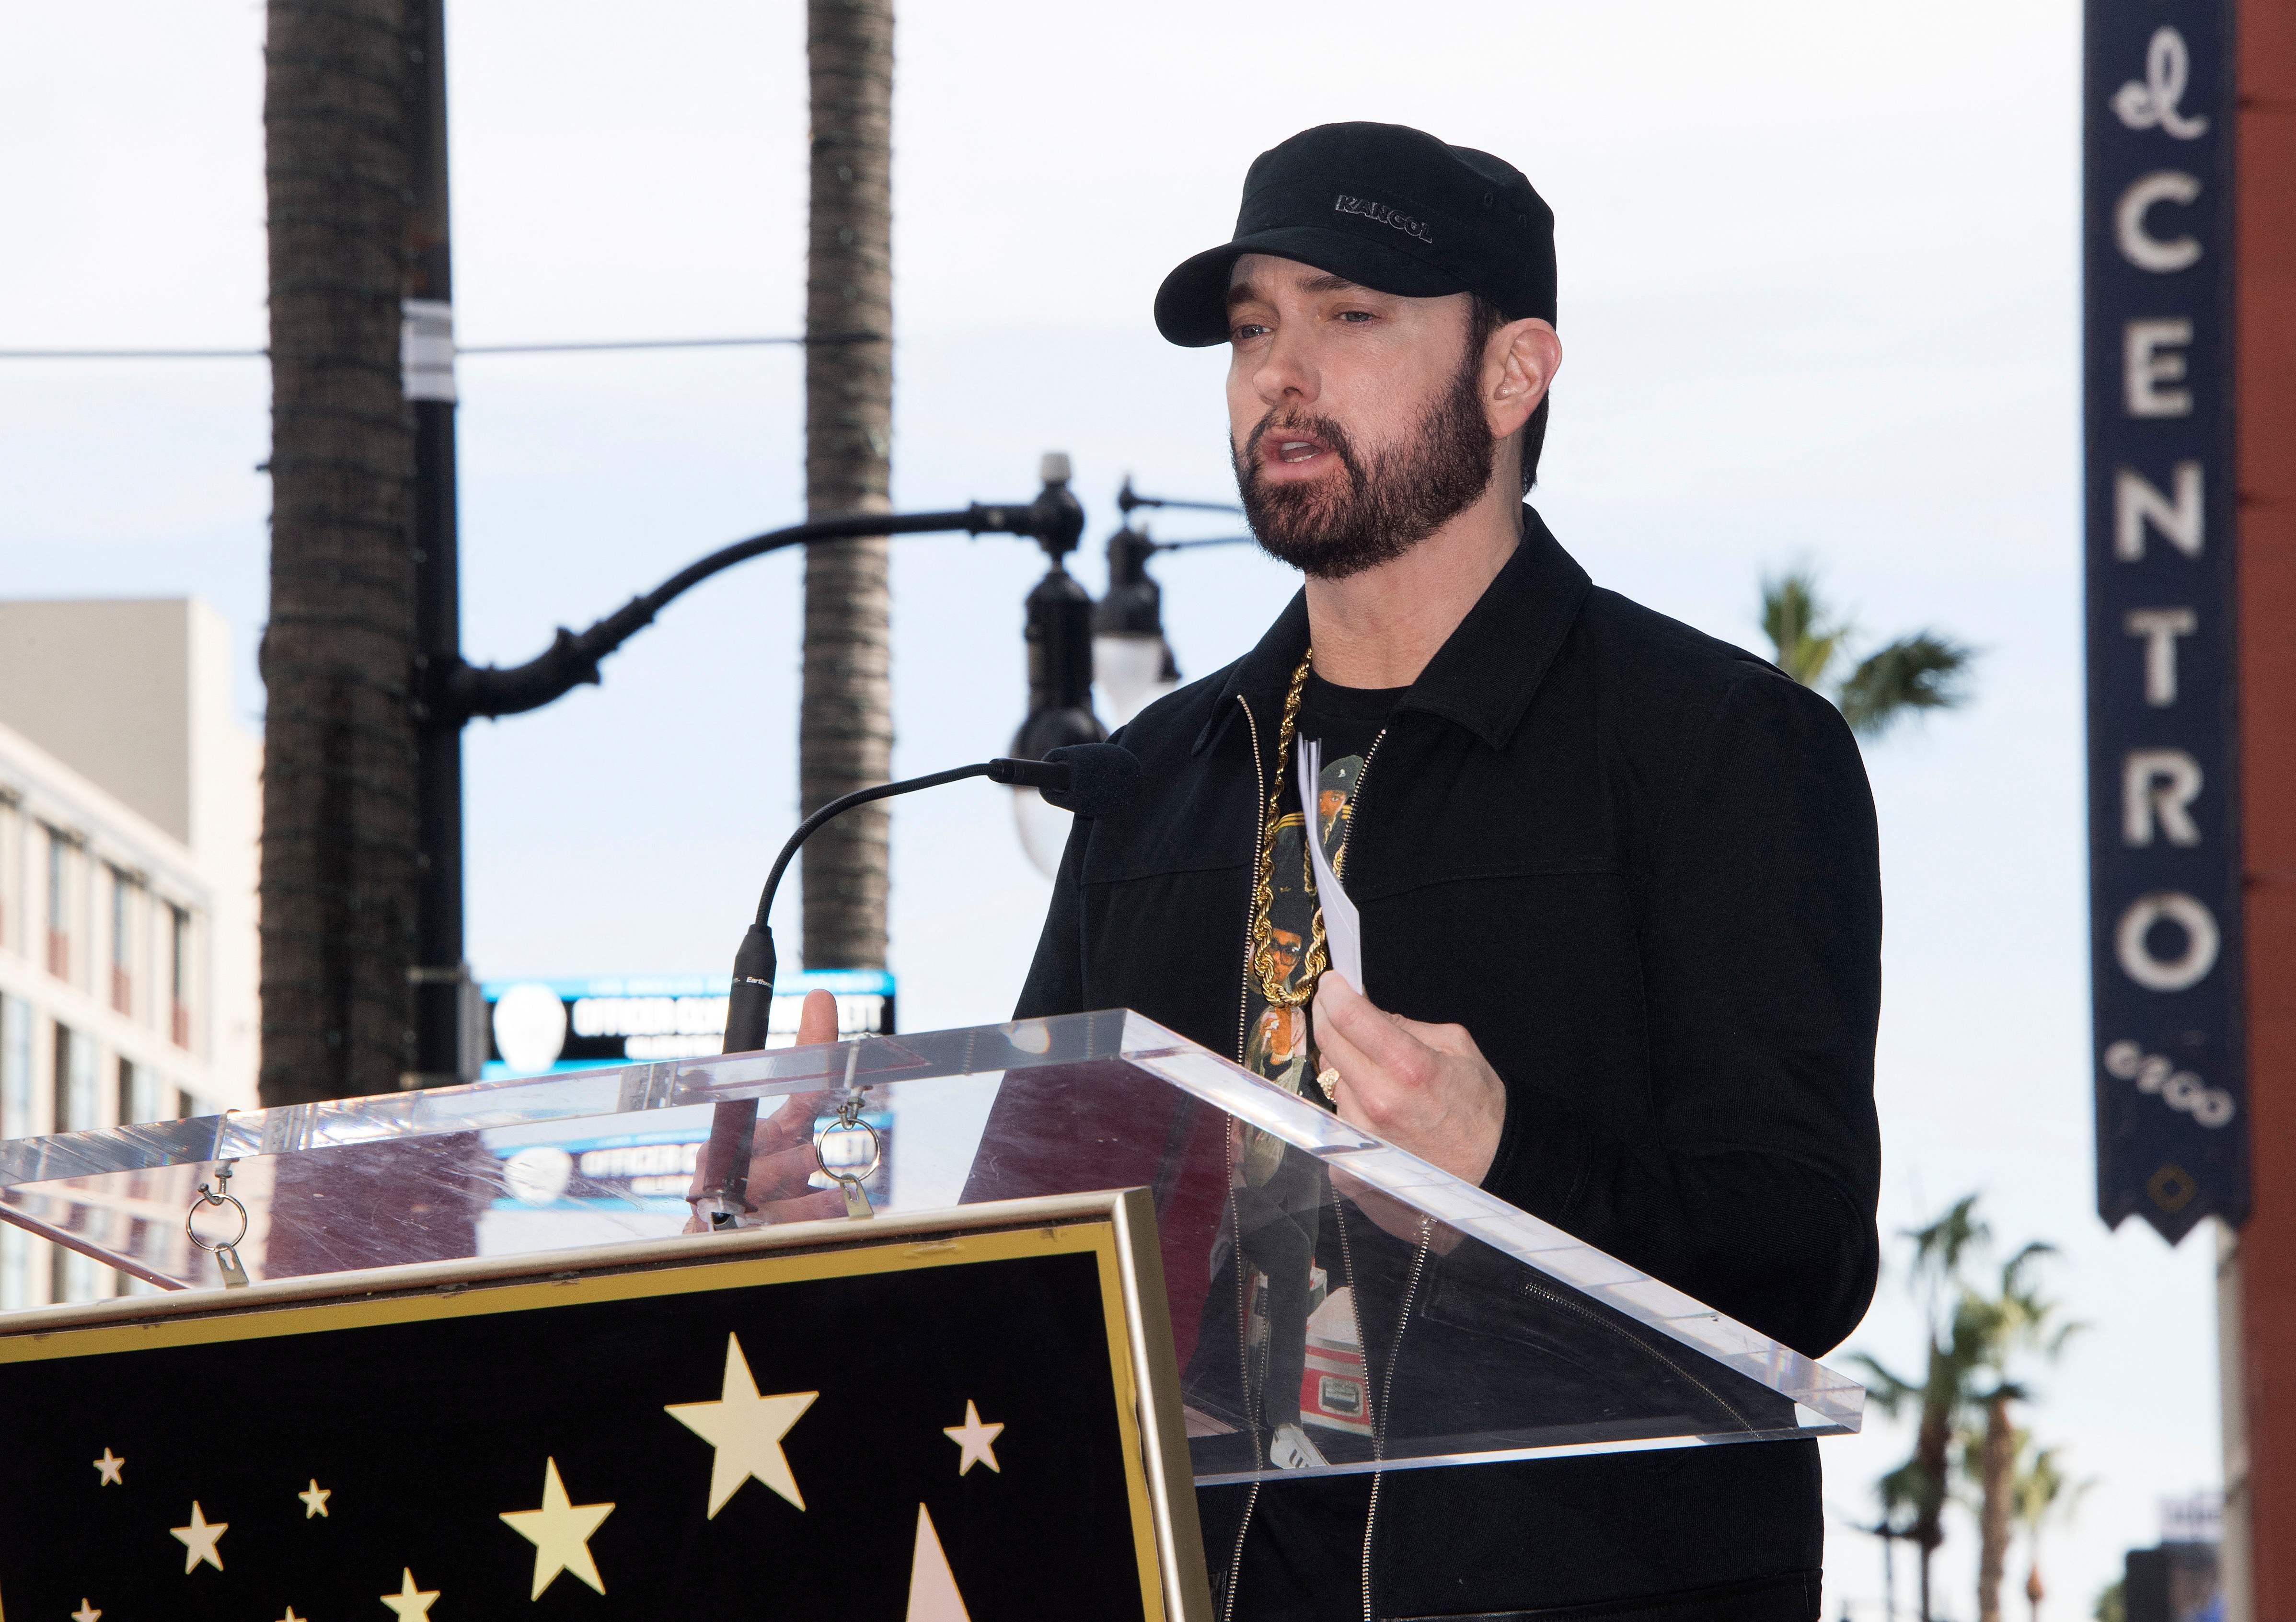 Eminem speaking during 50 Cent's Star on The Hollywood Walk of Fame Ceremony in 2020.